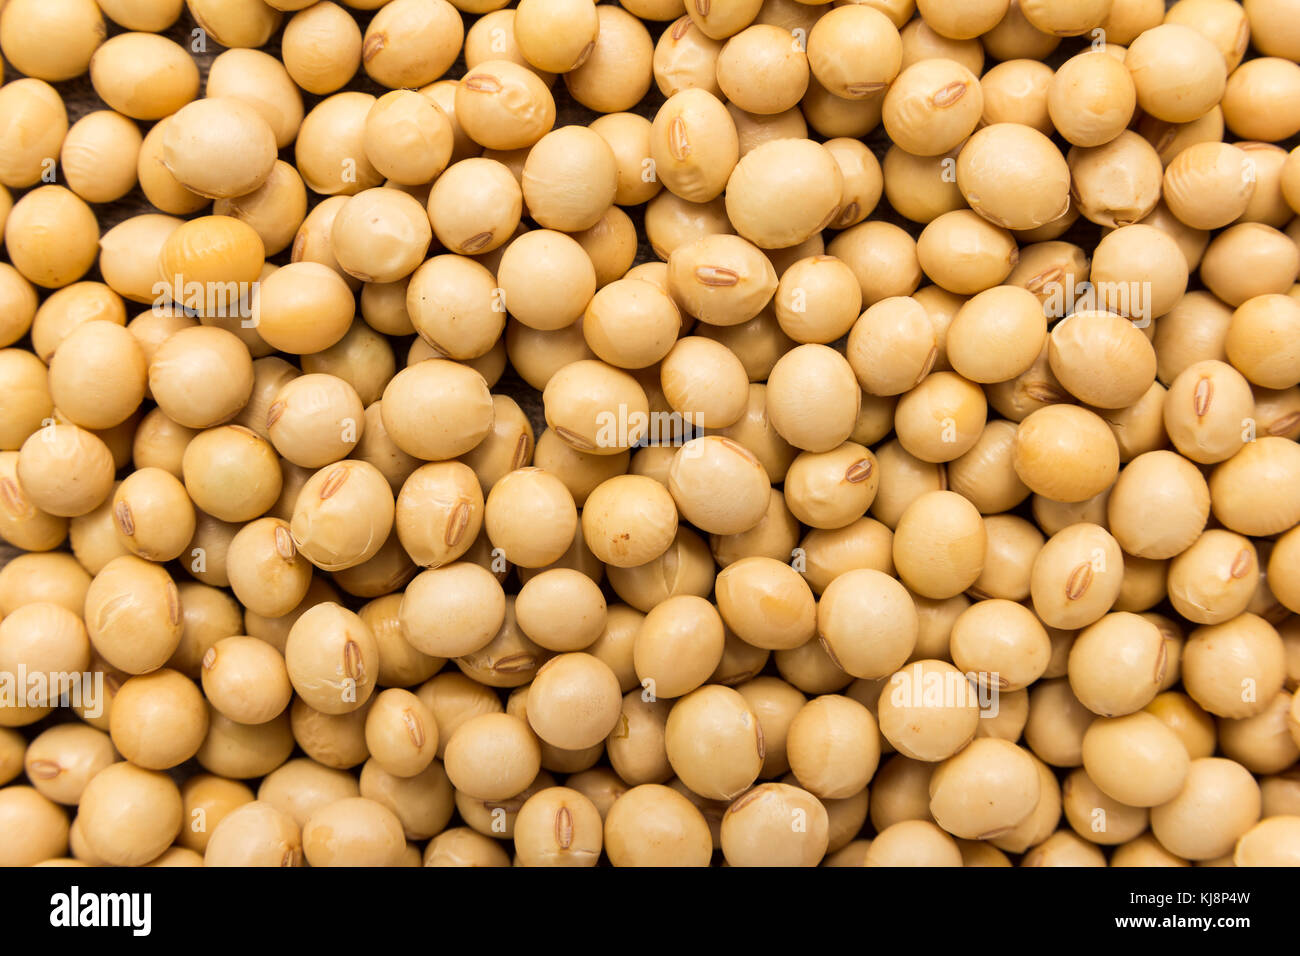 Glycine max is scientific name of Soybean legume. Also known as Soya Bean and Soja. Closeup of grains, background use. Stock Photo